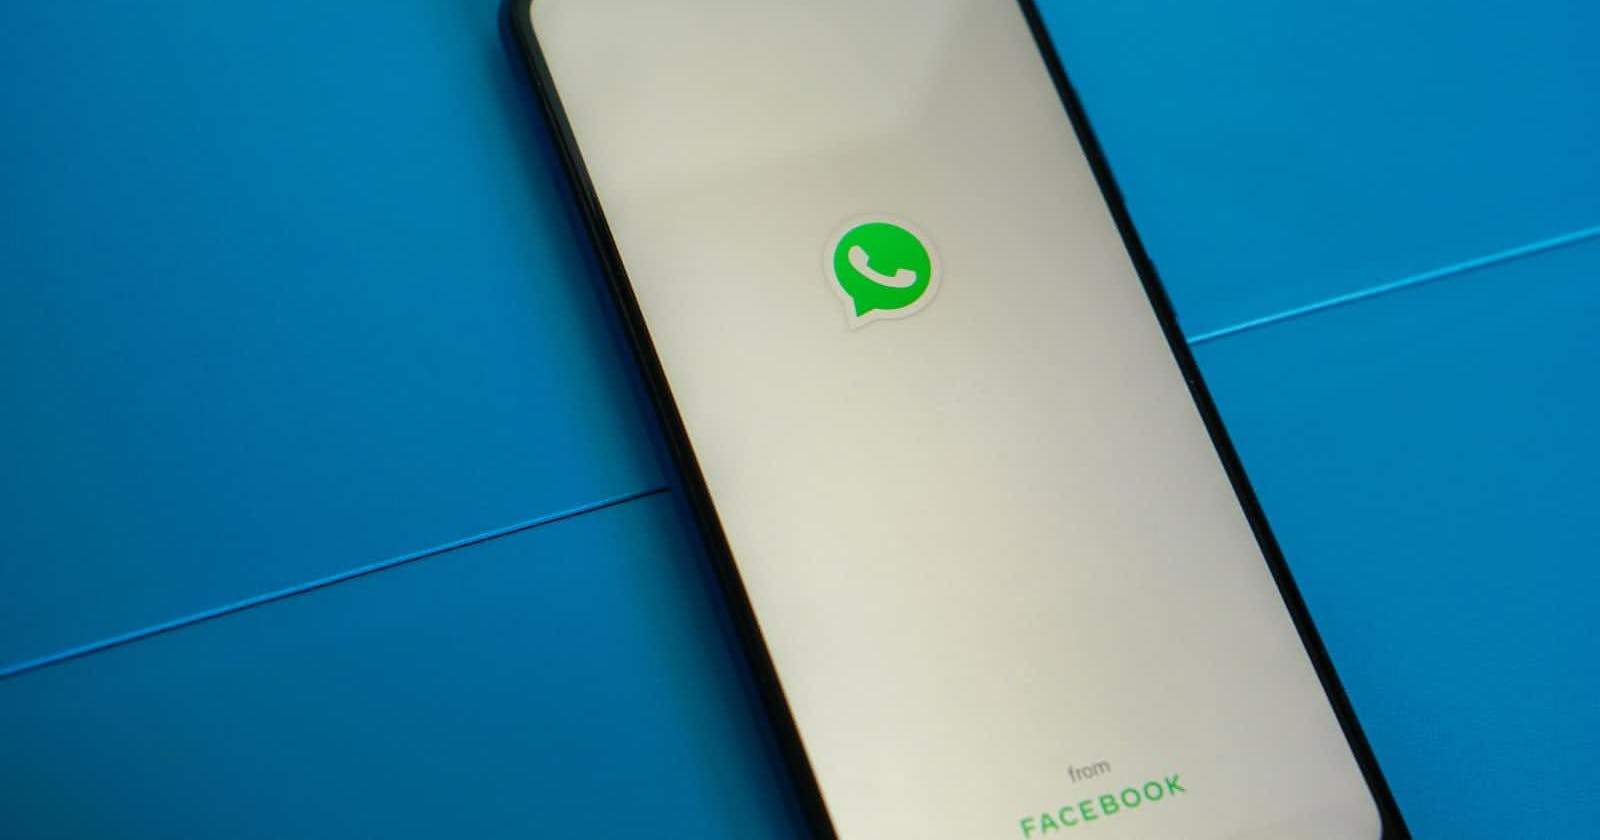 How to mute WhatsApp calls from unknown numbers